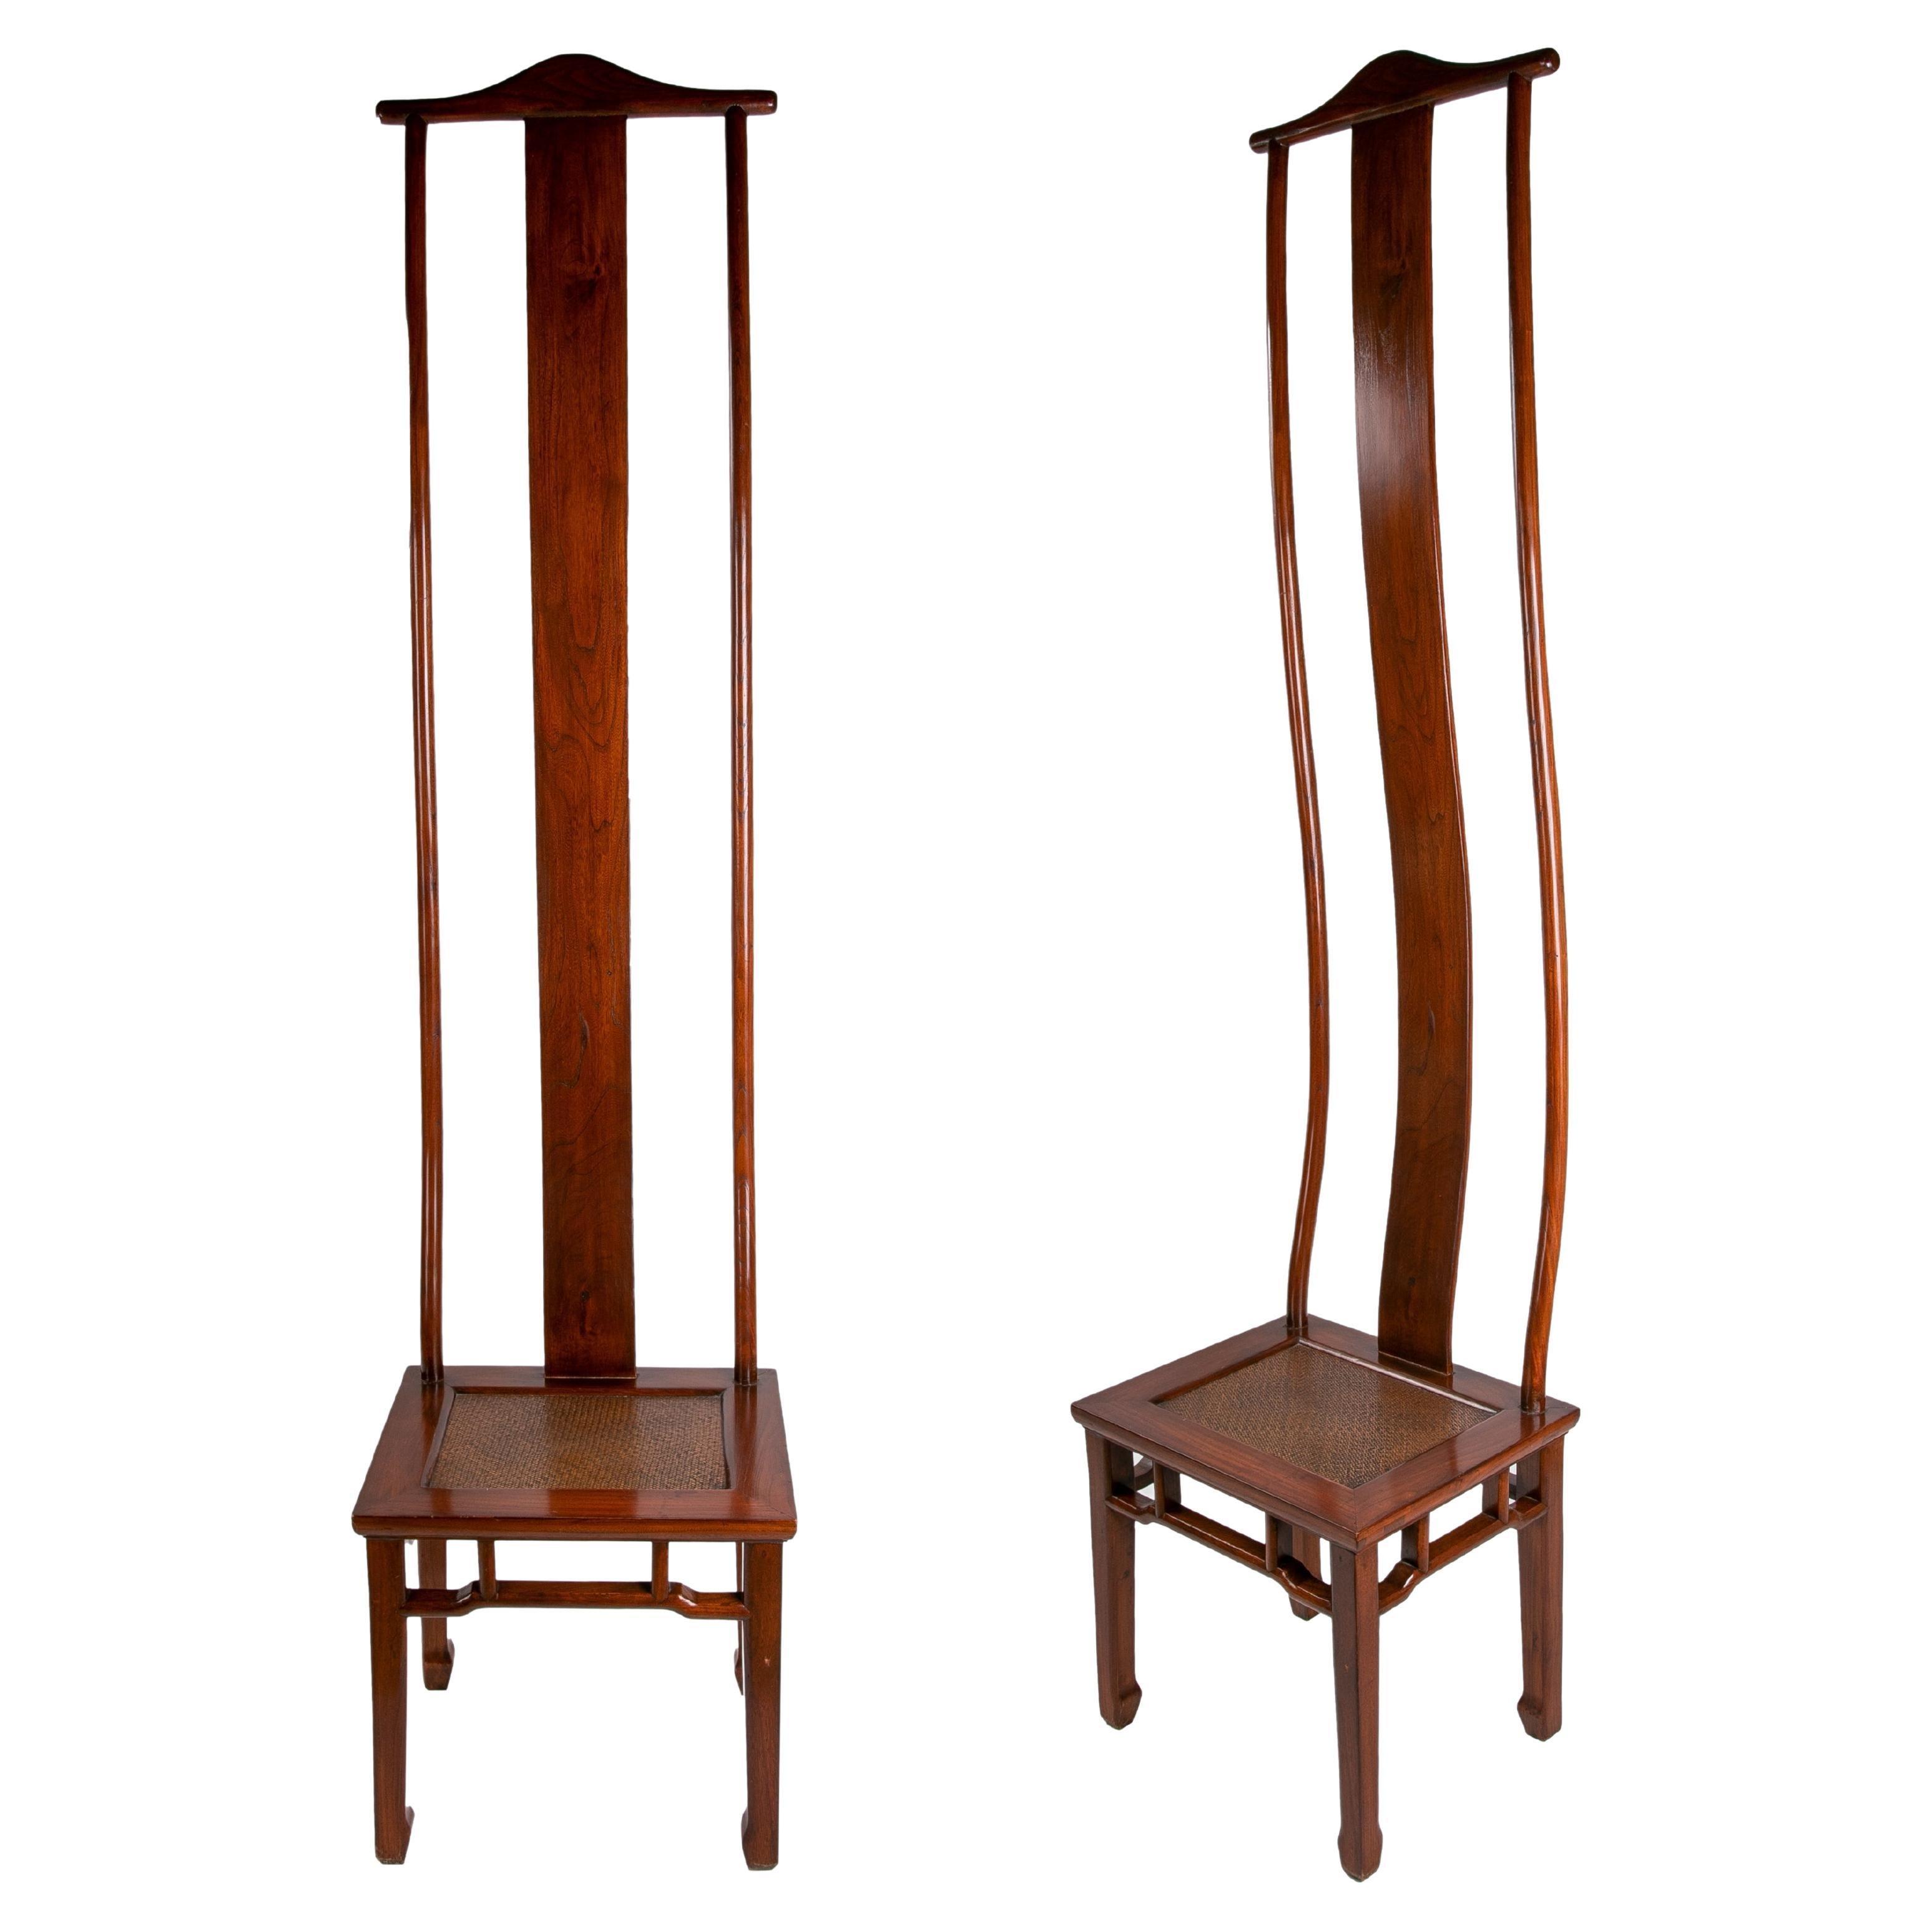 Pair of Oriental Style Wooden Chairs with Very High Backs For Sale